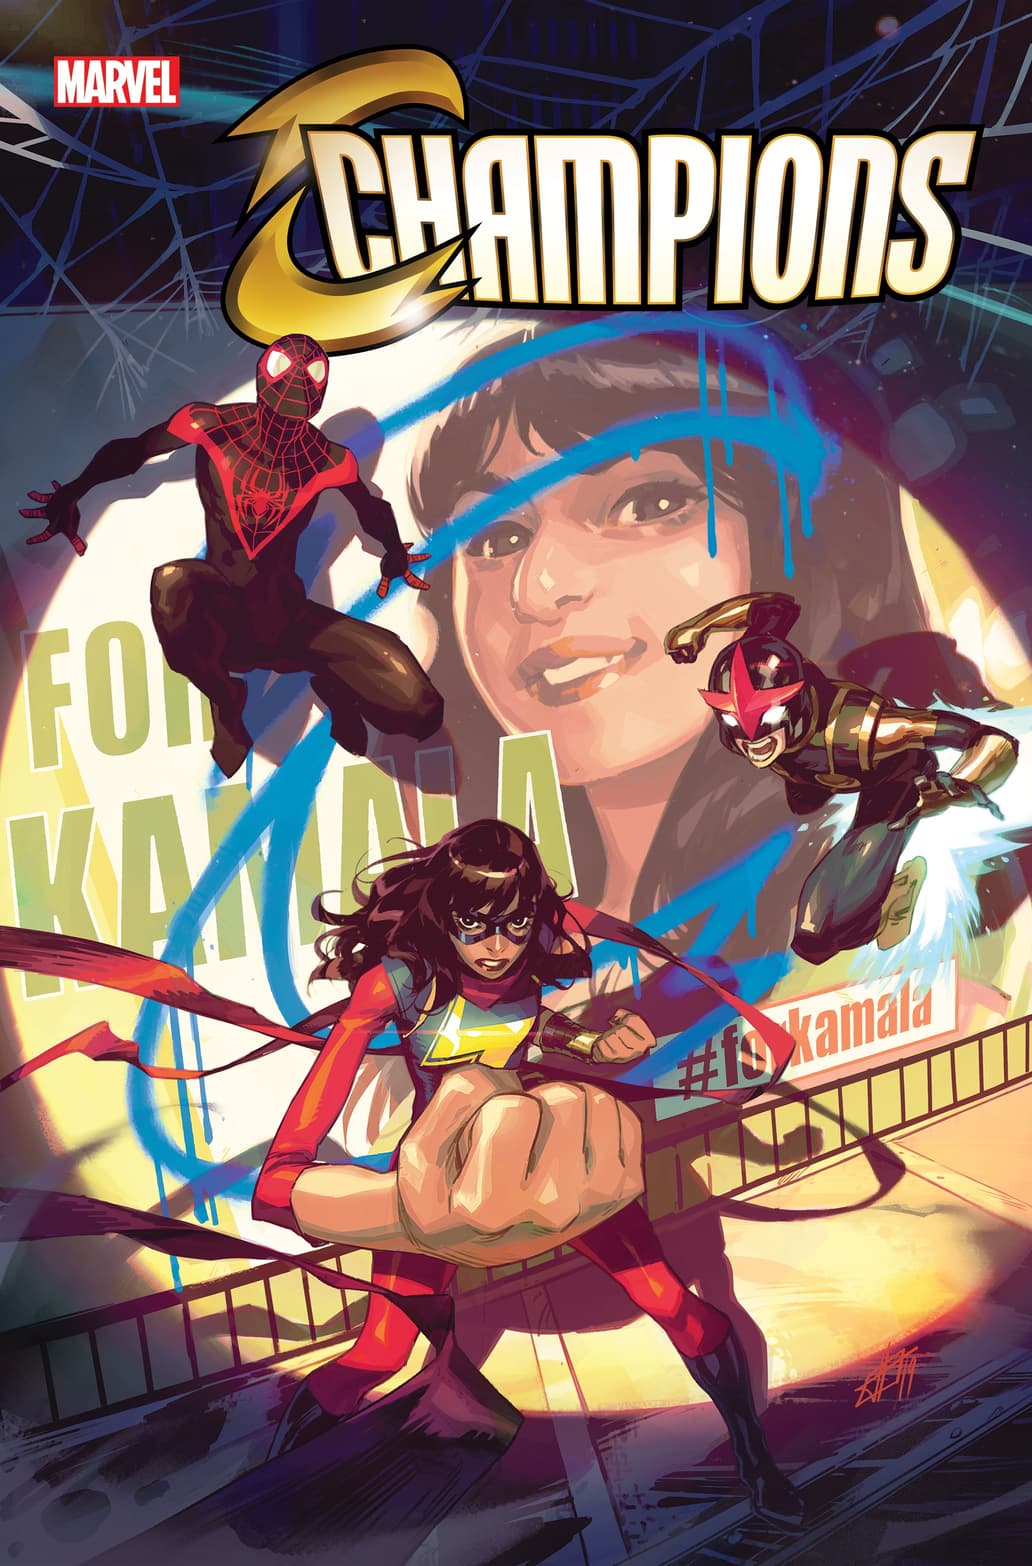 CHAMPIONS #1 WRITTEN BY EVE L. EWING, ART BY SIMONE DI MEO, COVER BY TONI INFANTE